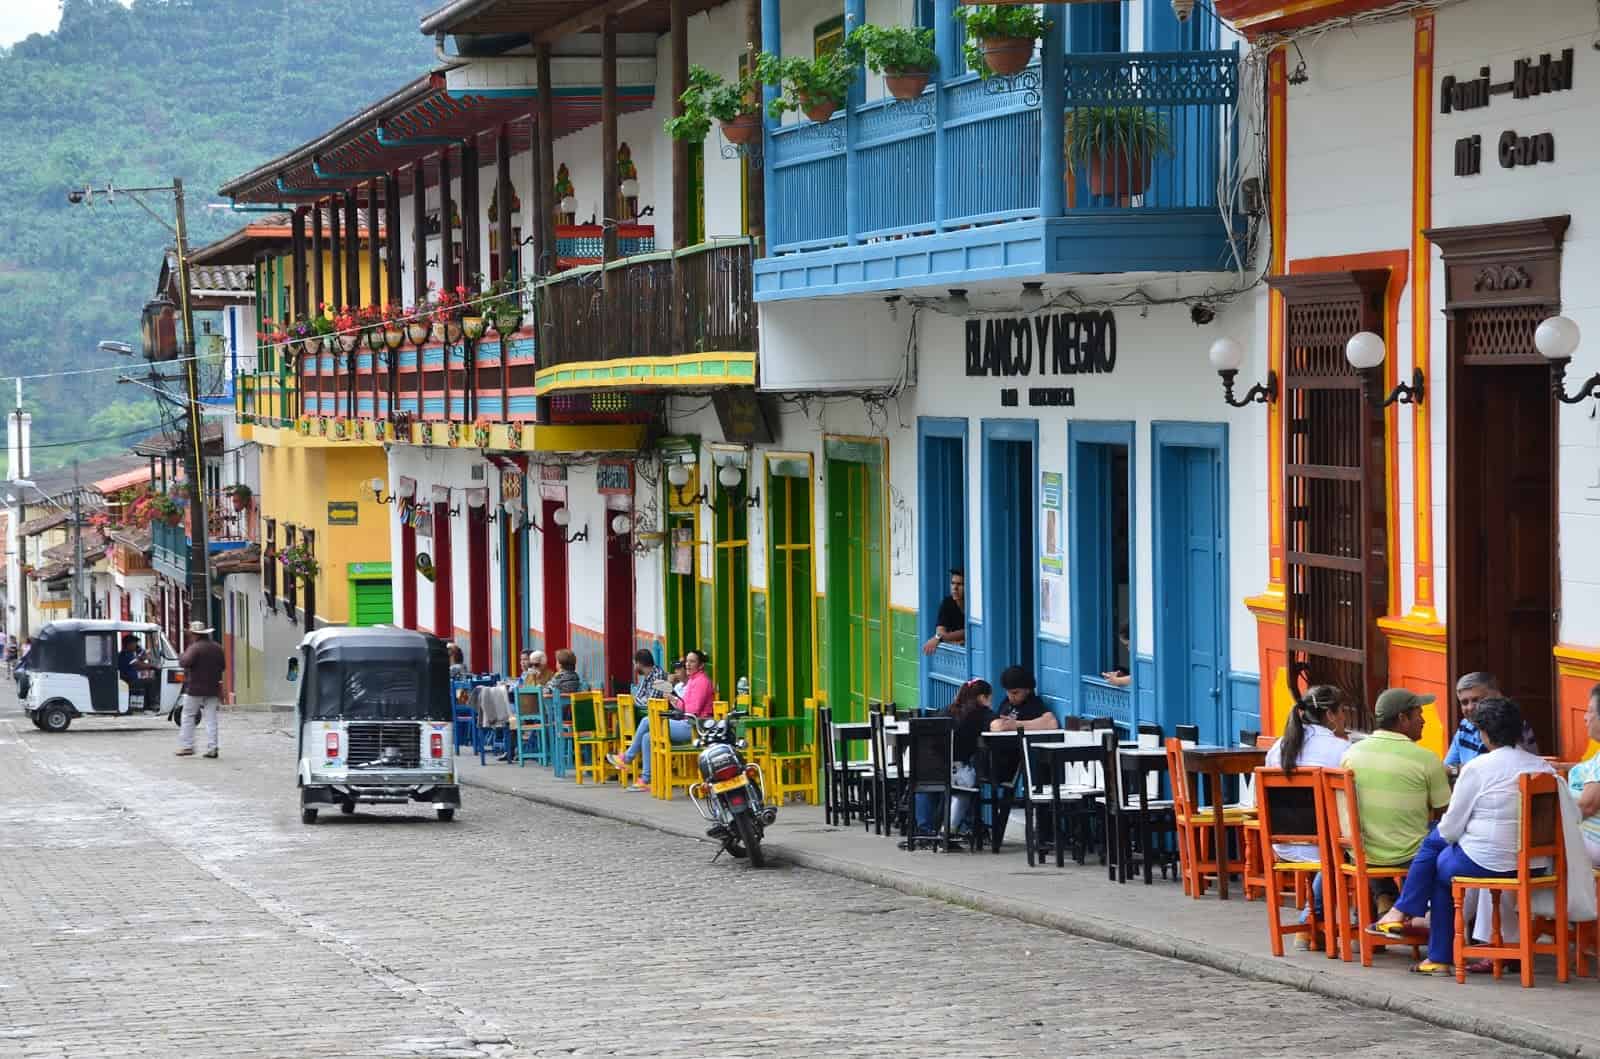 Buildings along the plaza in Jardín, Antioquia, Colombia